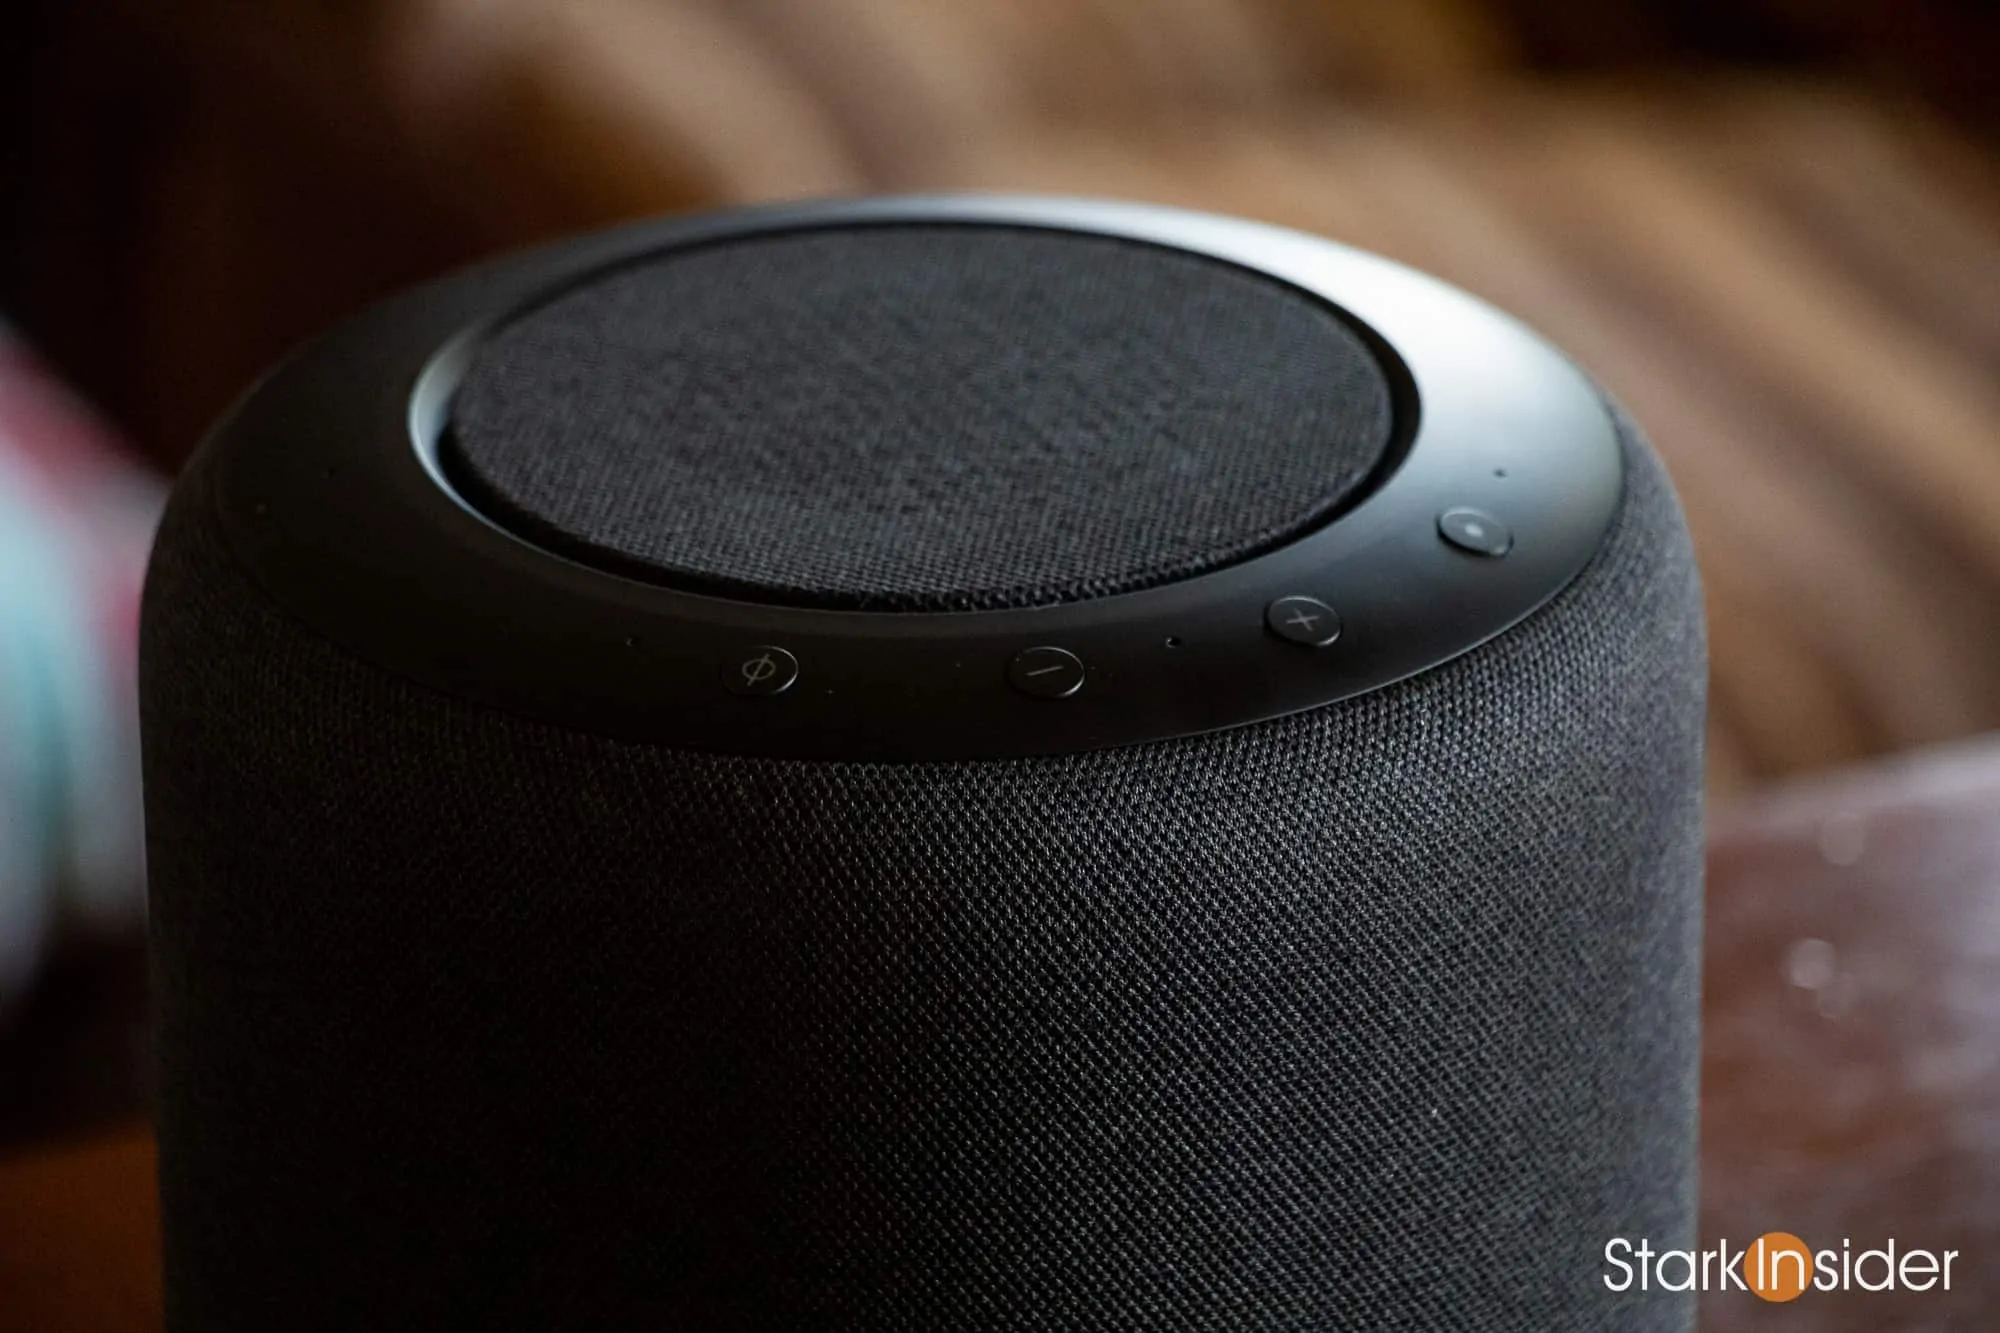 Echo Studio Review: 3D High-Quality Sound with Smart Home Technology